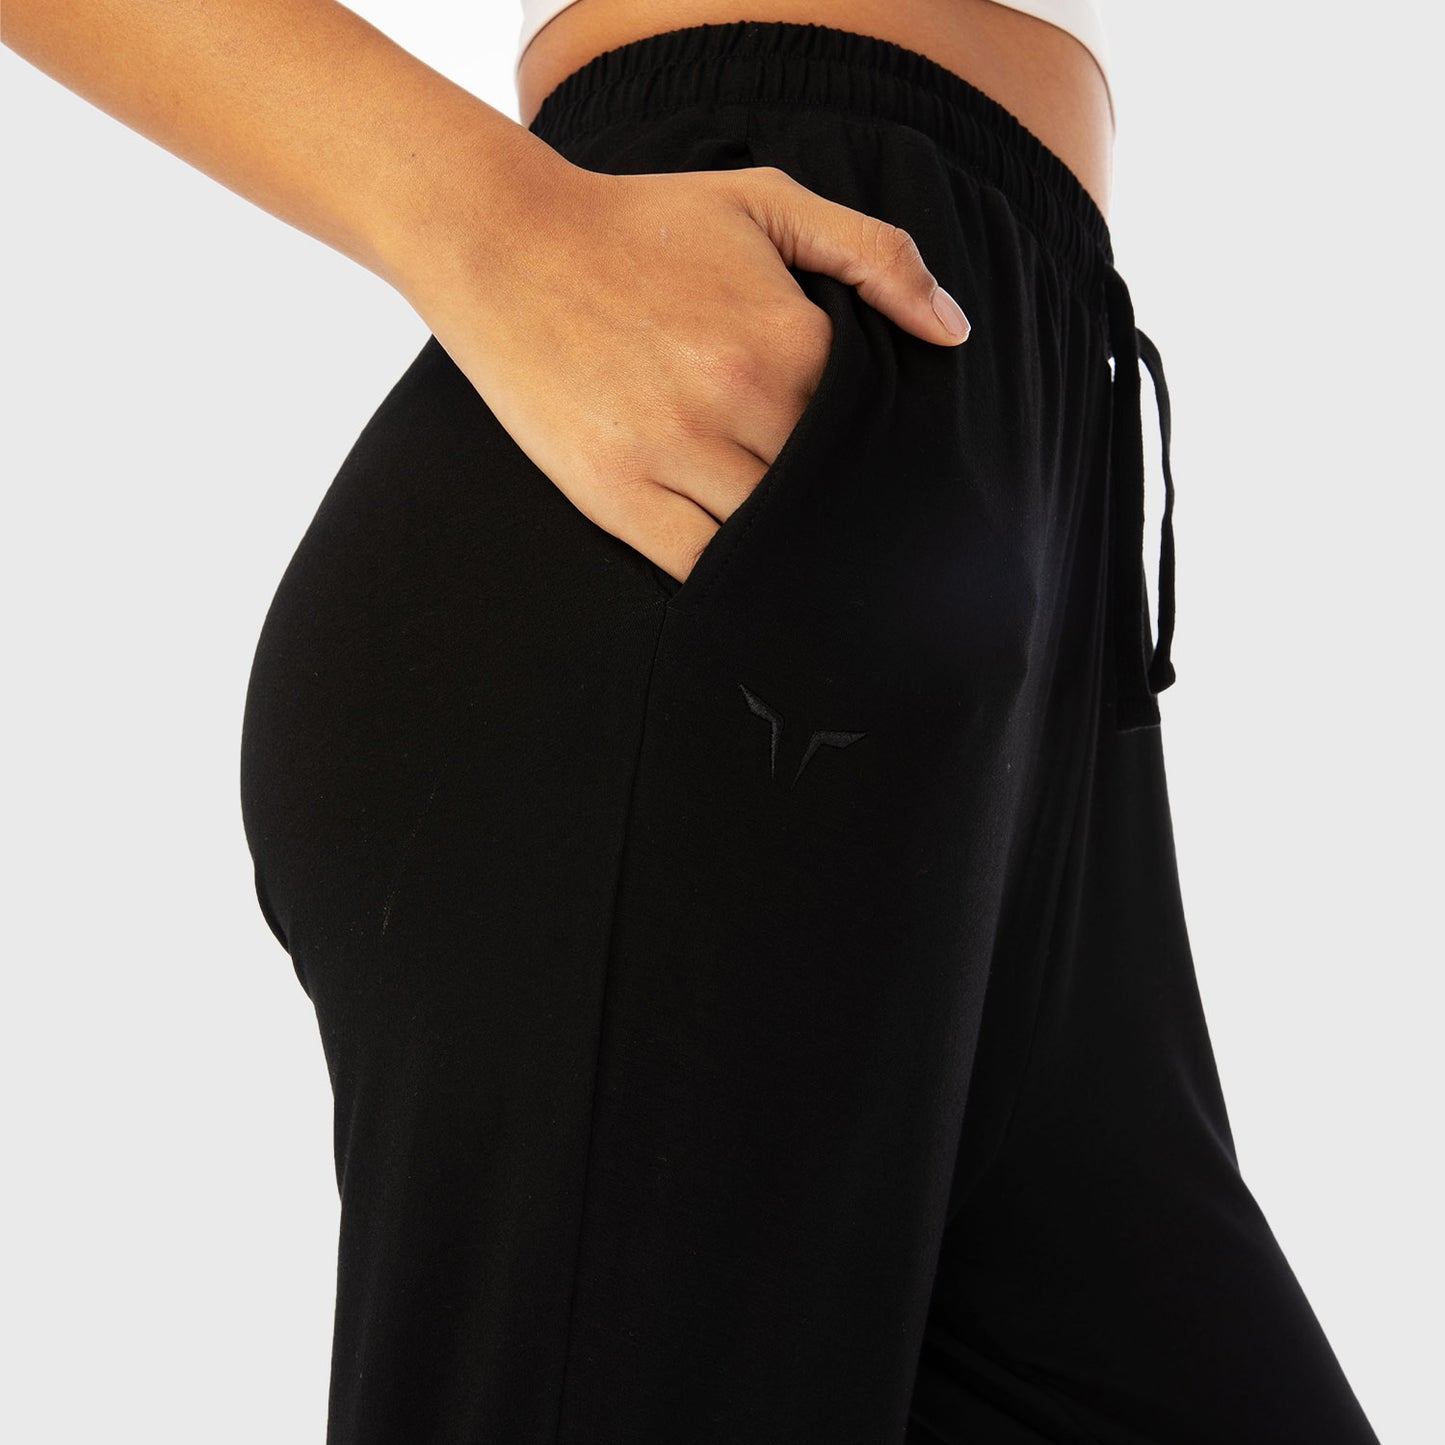 squatwolf-workout-clothes-infinity-studio-joggers-black-gym-pants-for-women